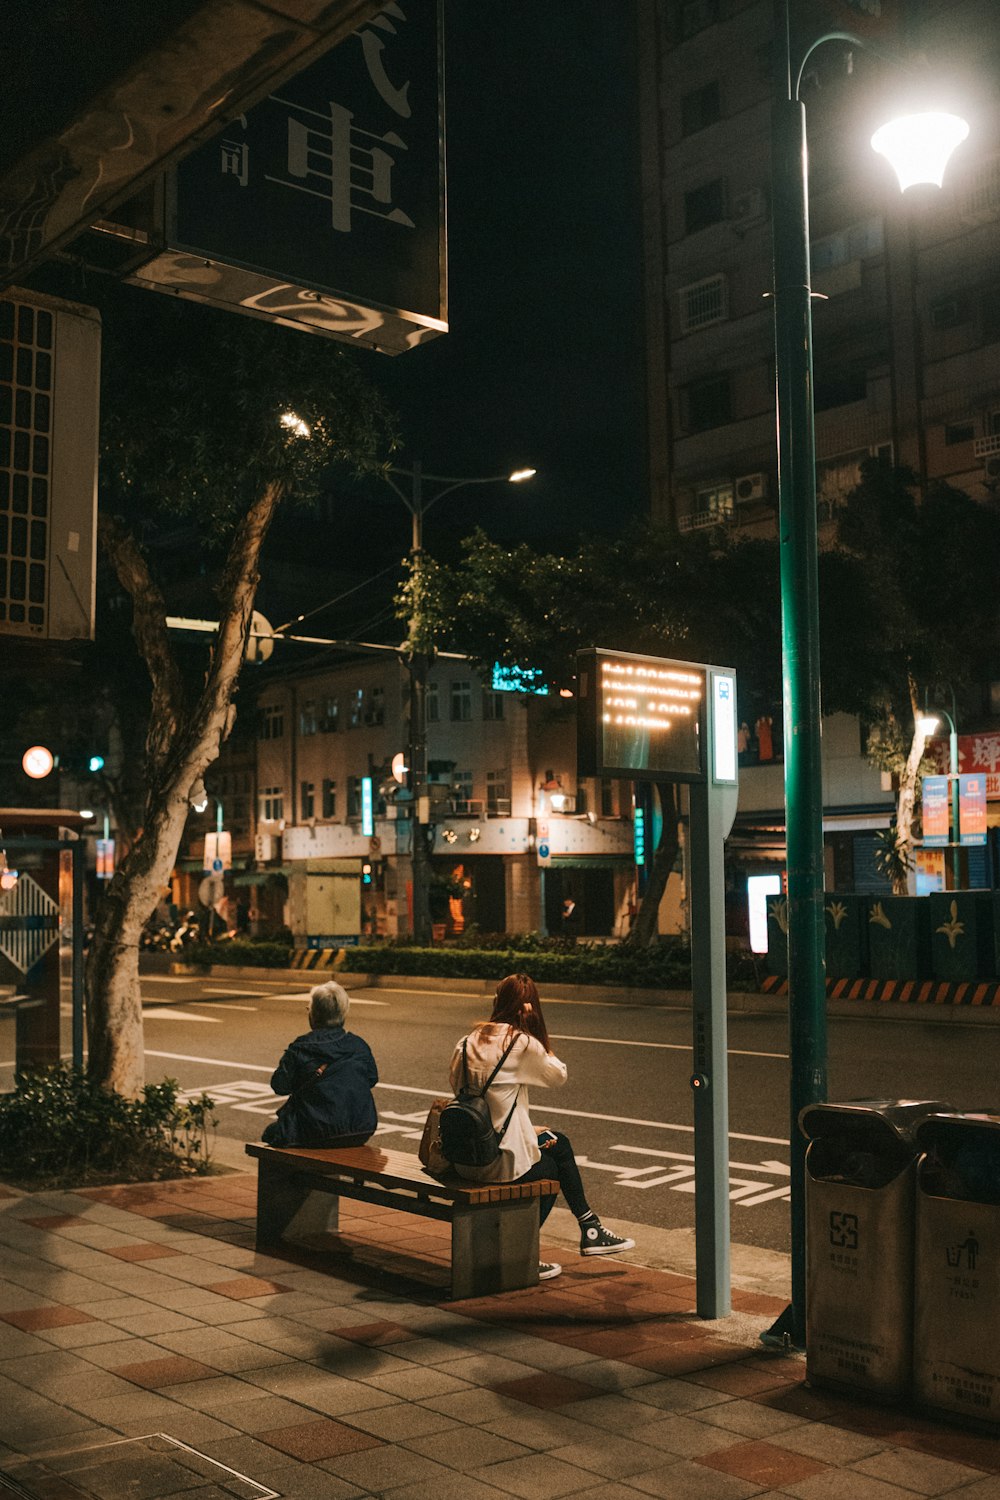 man and woman sitting on bench near street light during night time